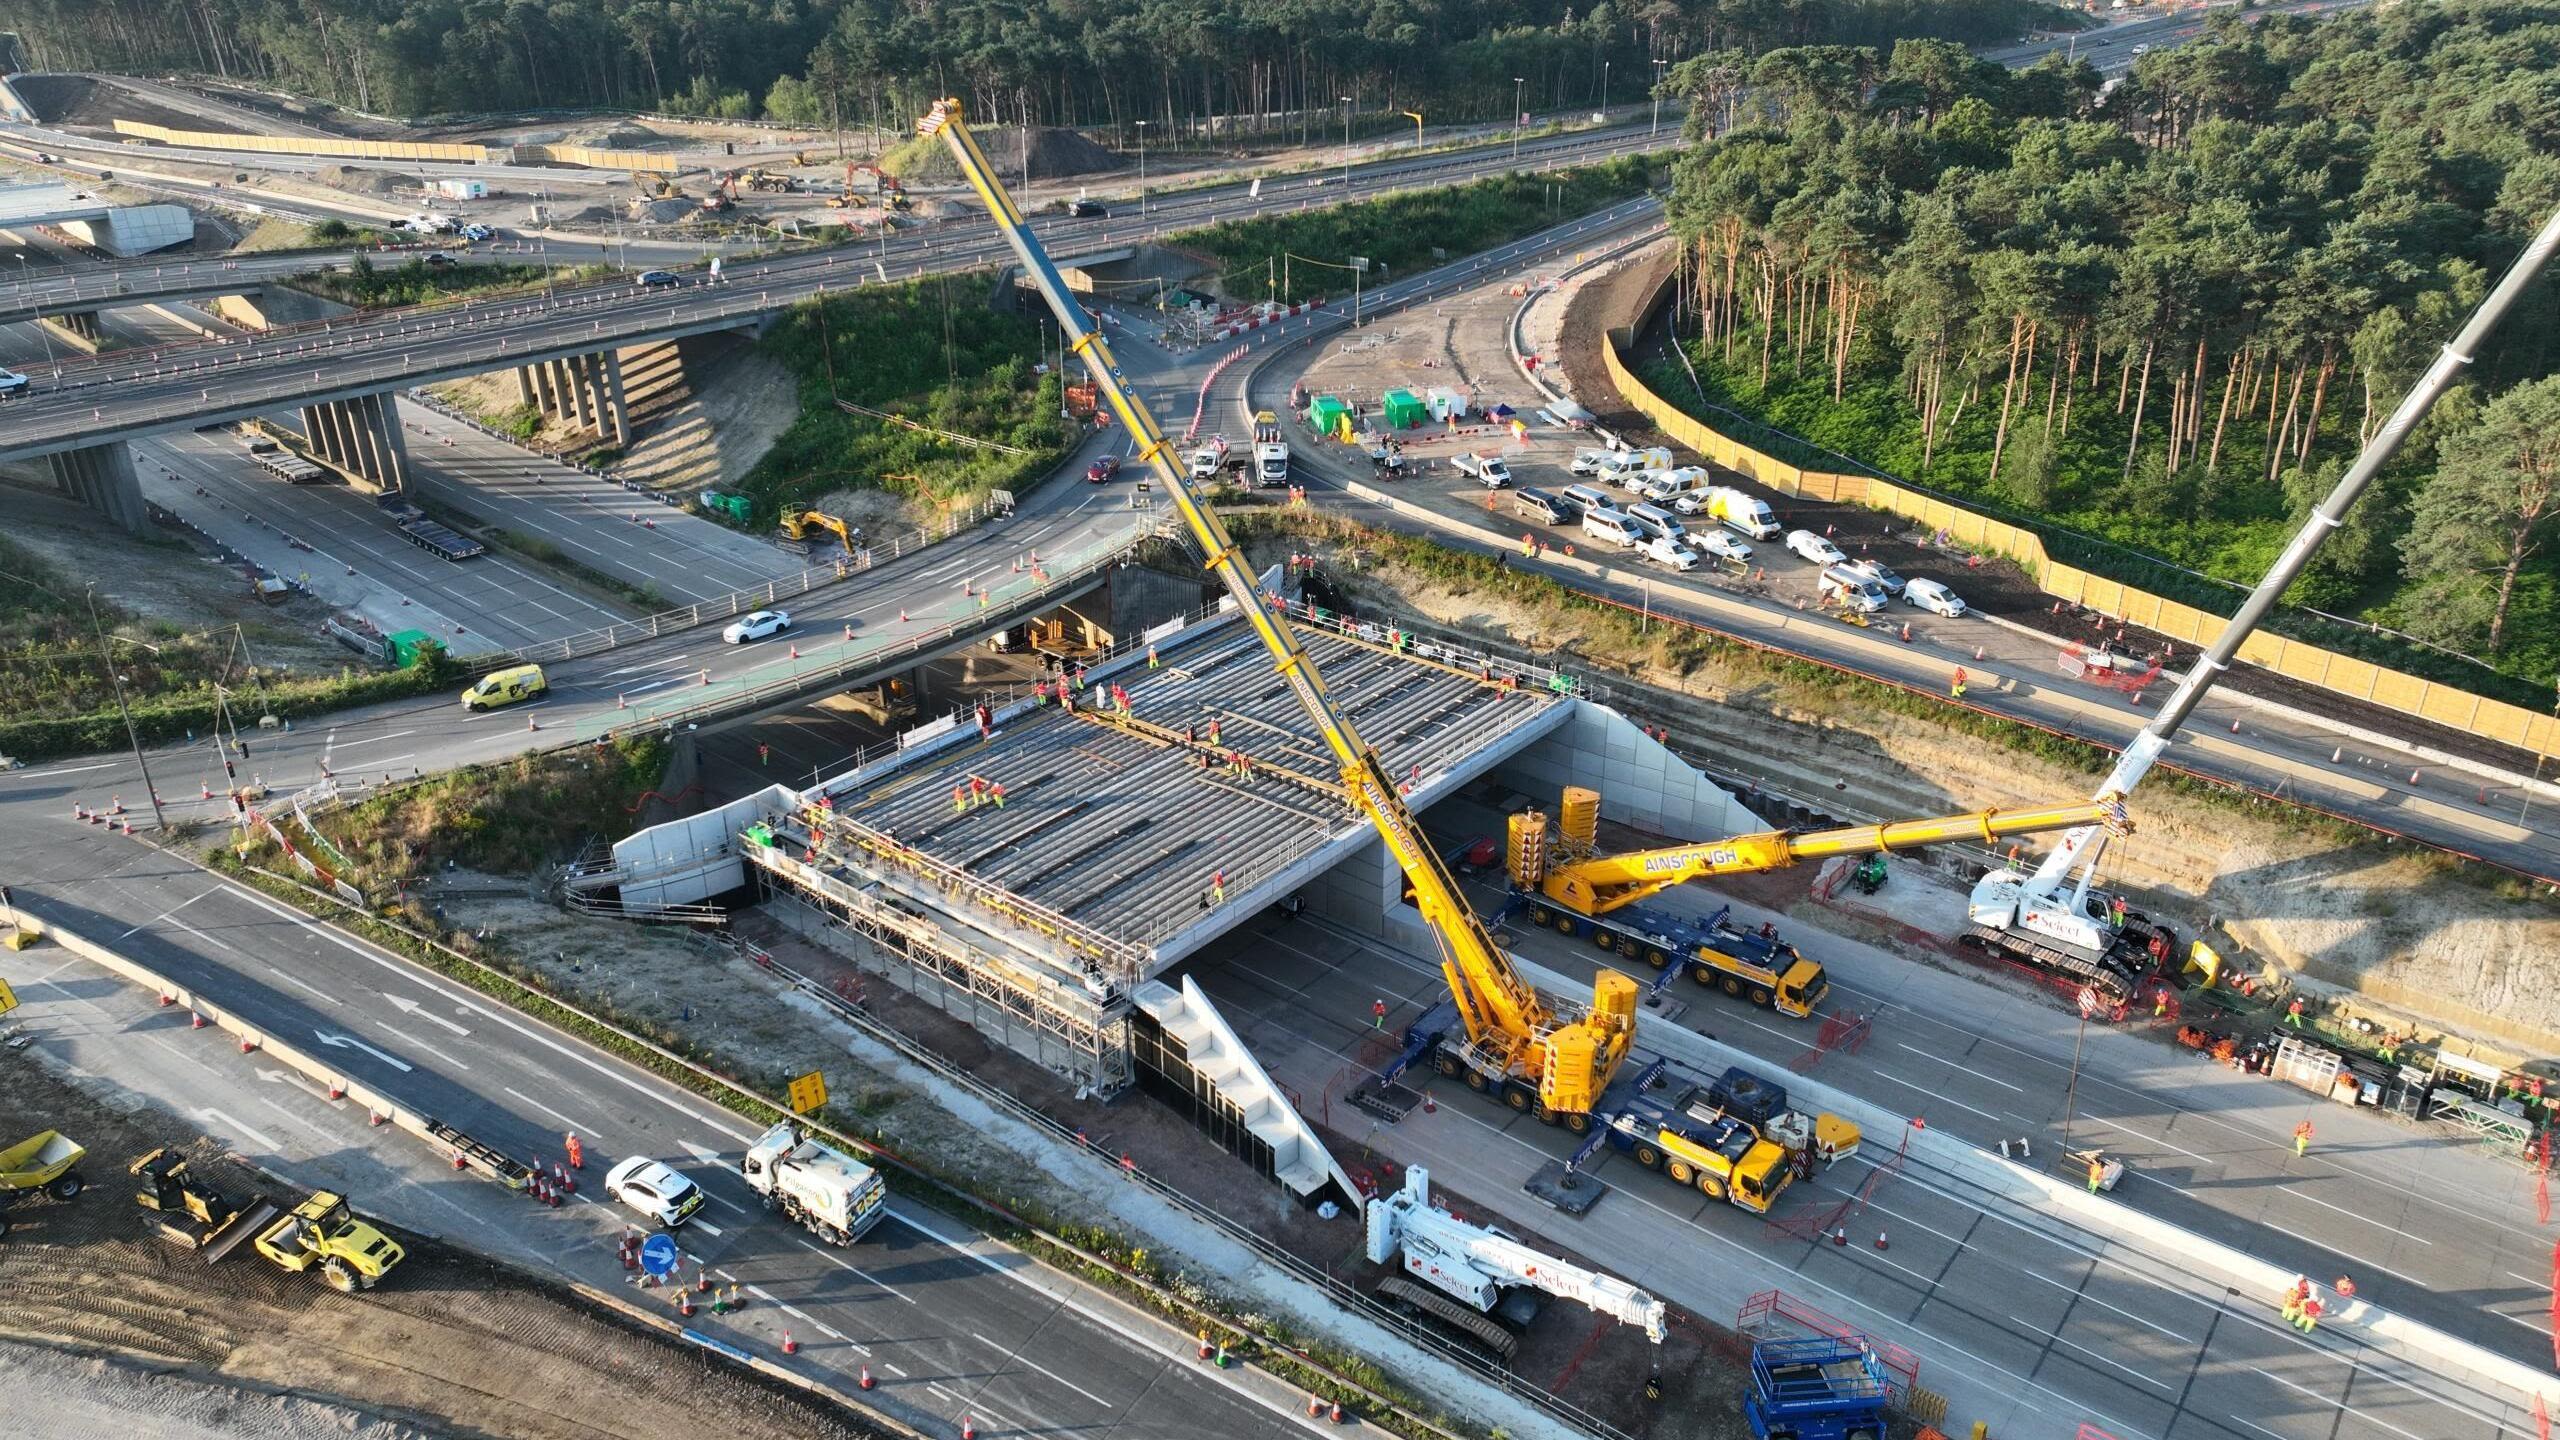 Traffic 'flowing smoothly' ahead of M25 reopening